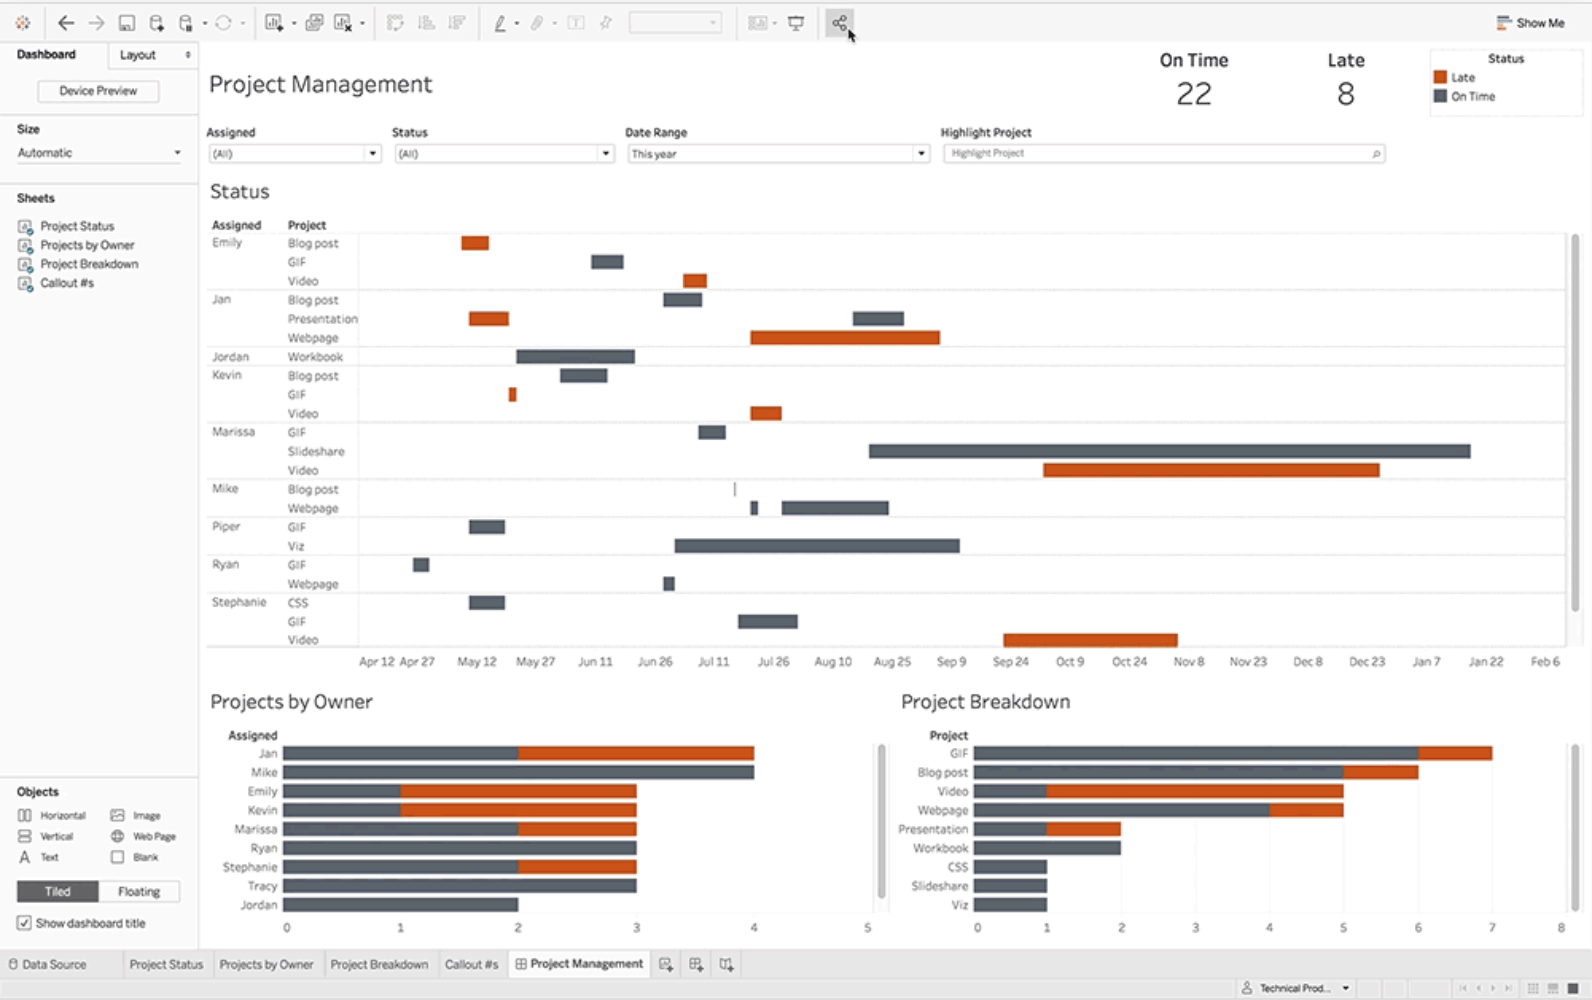 How To Use Tableau For Project Management - TechnologyAdvice